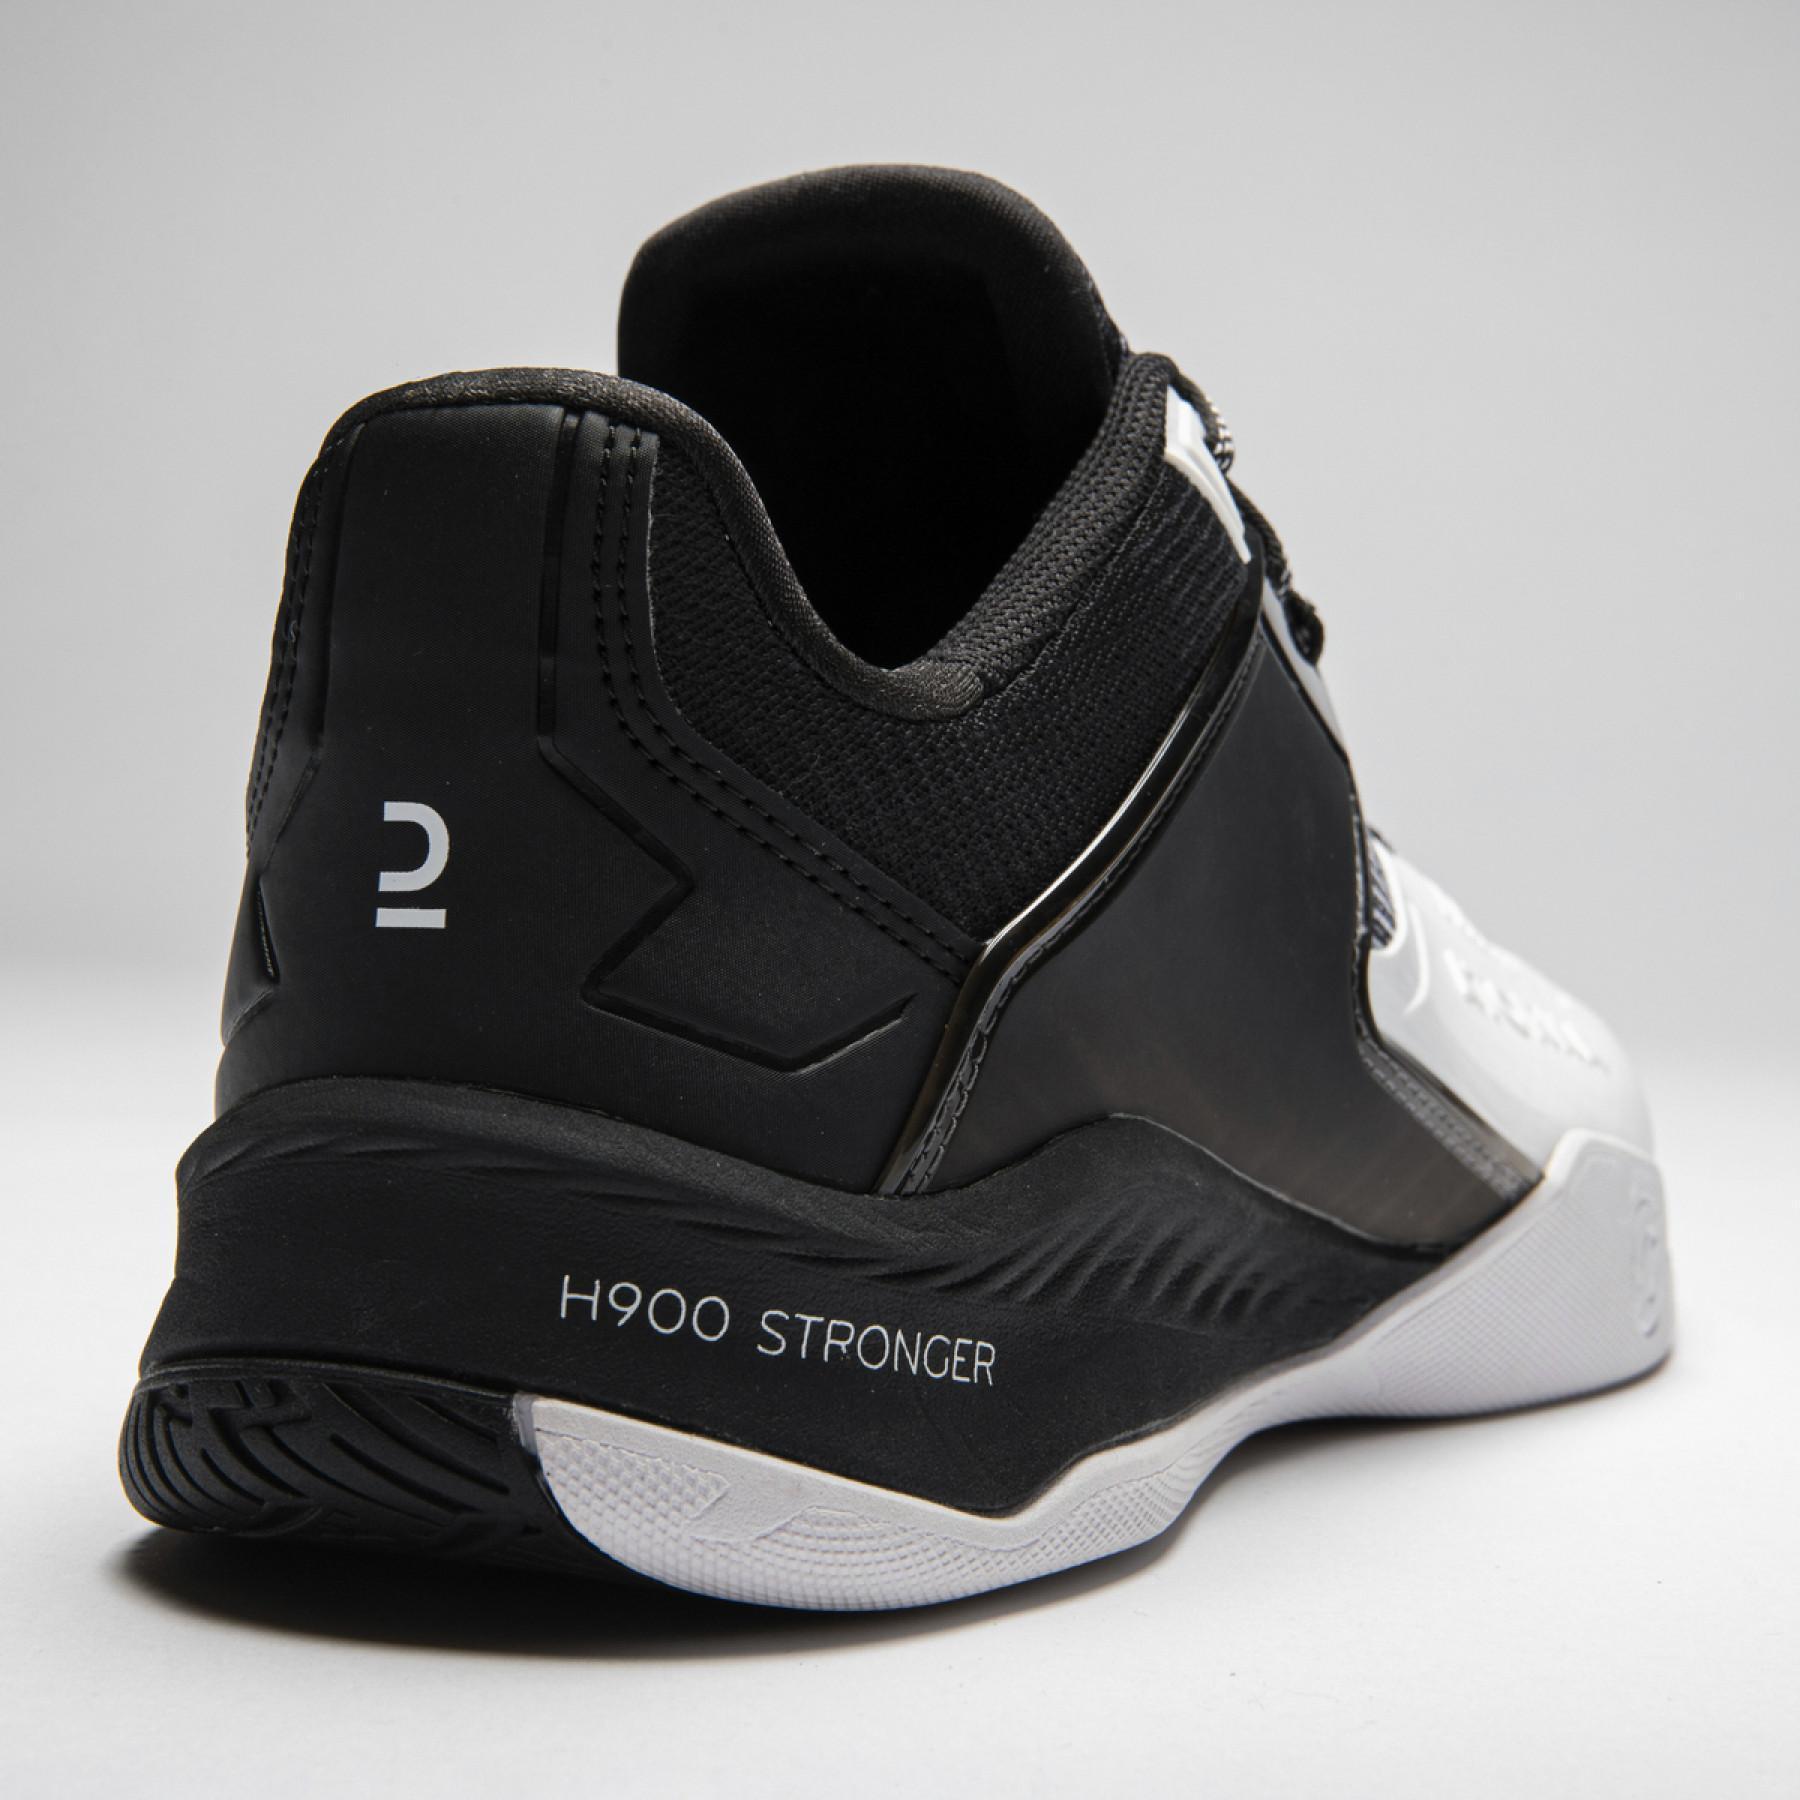 Shoes Atorka 900 Stronger